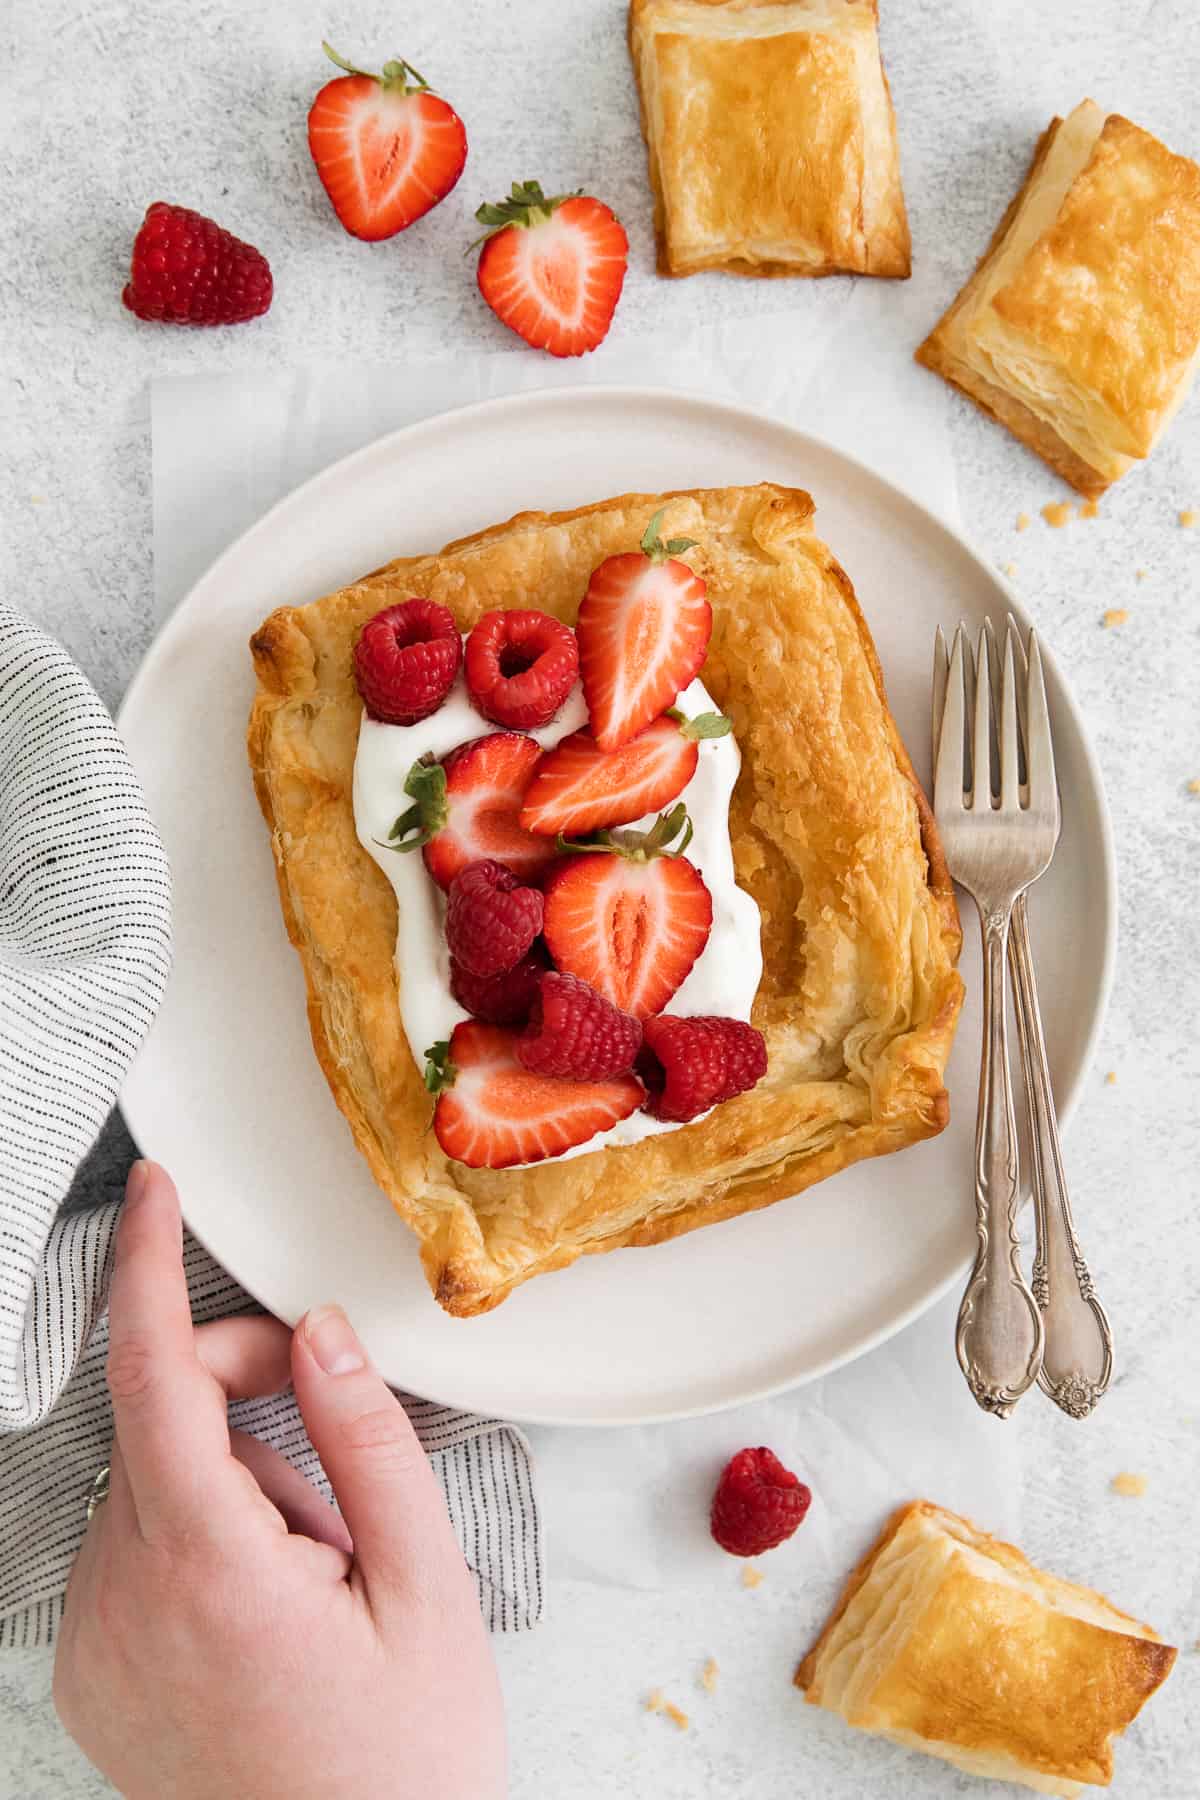 Homemade puff pastry topped with whipped cream and berries on a plate.